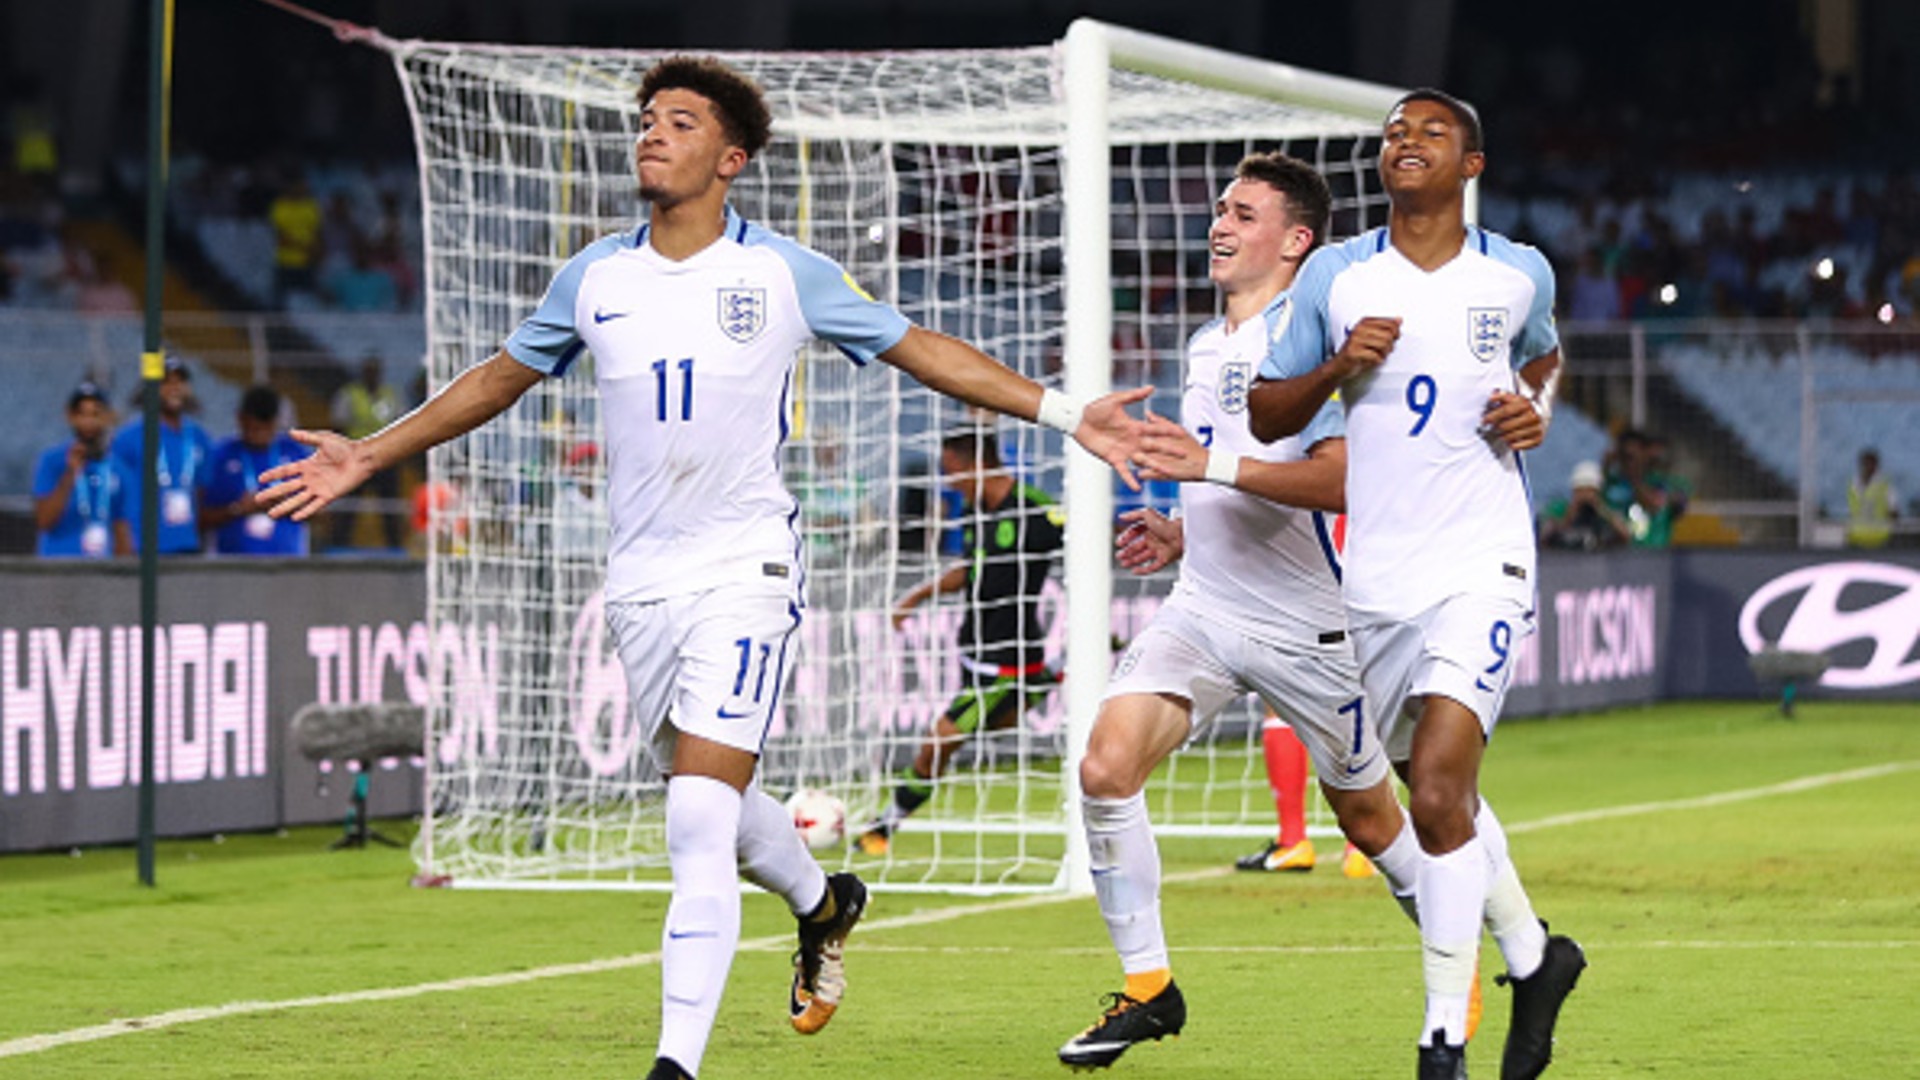 Foden, Sancho to Brewster: England’s U17 World Cup winners – Where are they now?